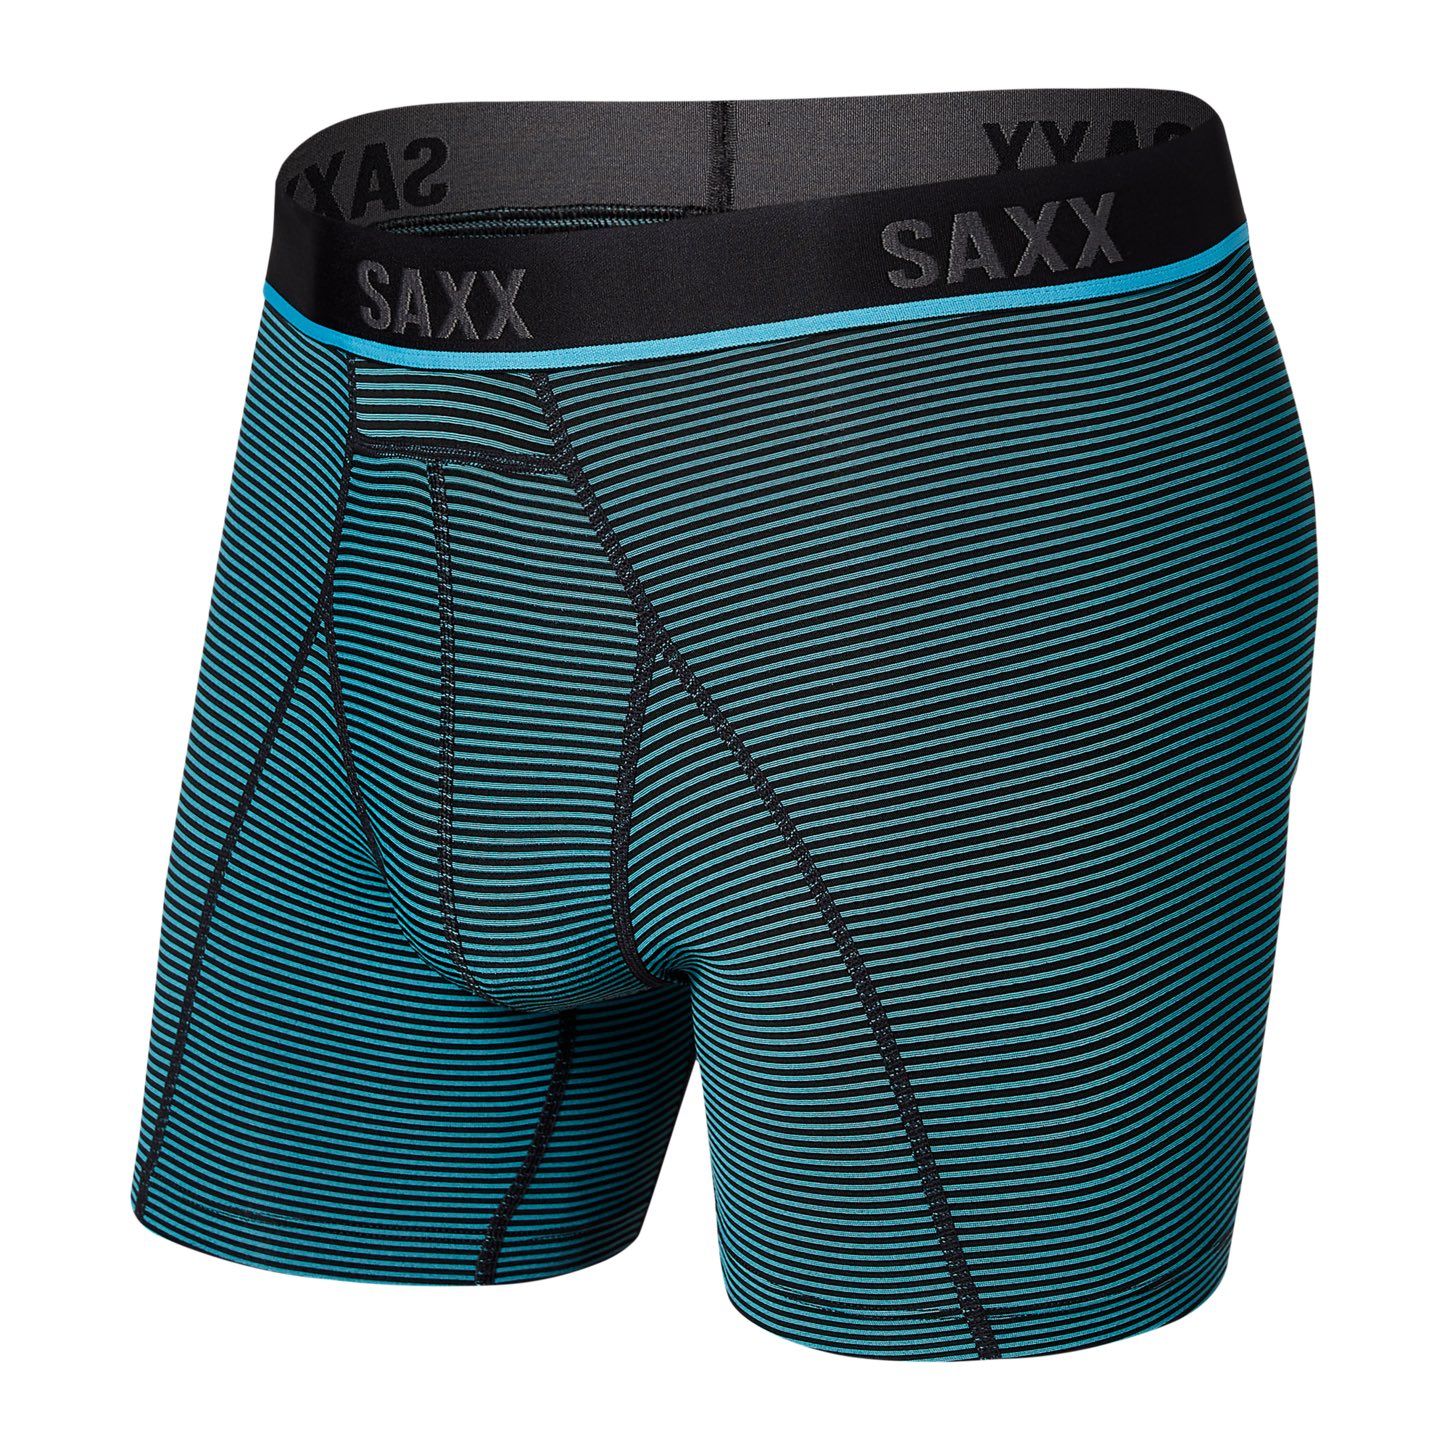 Boxer brief Kinetic HD - Cool blue feed stripe